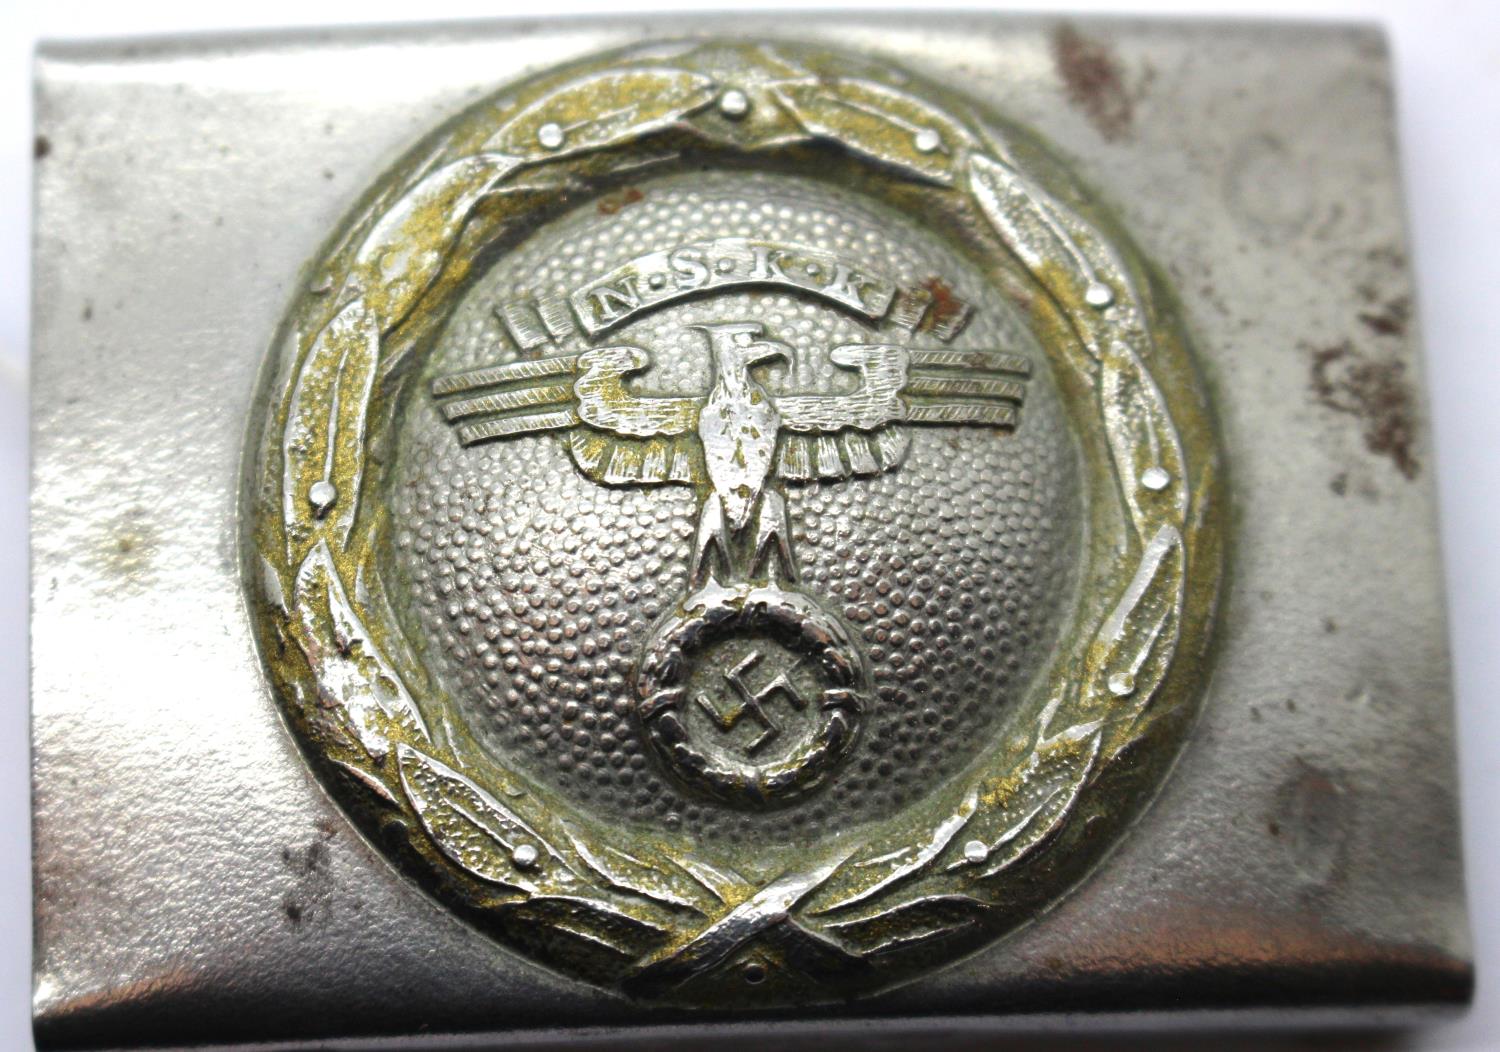 German WWII re-enactment NSKK belt buckle. P&P Group 1 (£14+VAT for the first lot and £1+VAT for